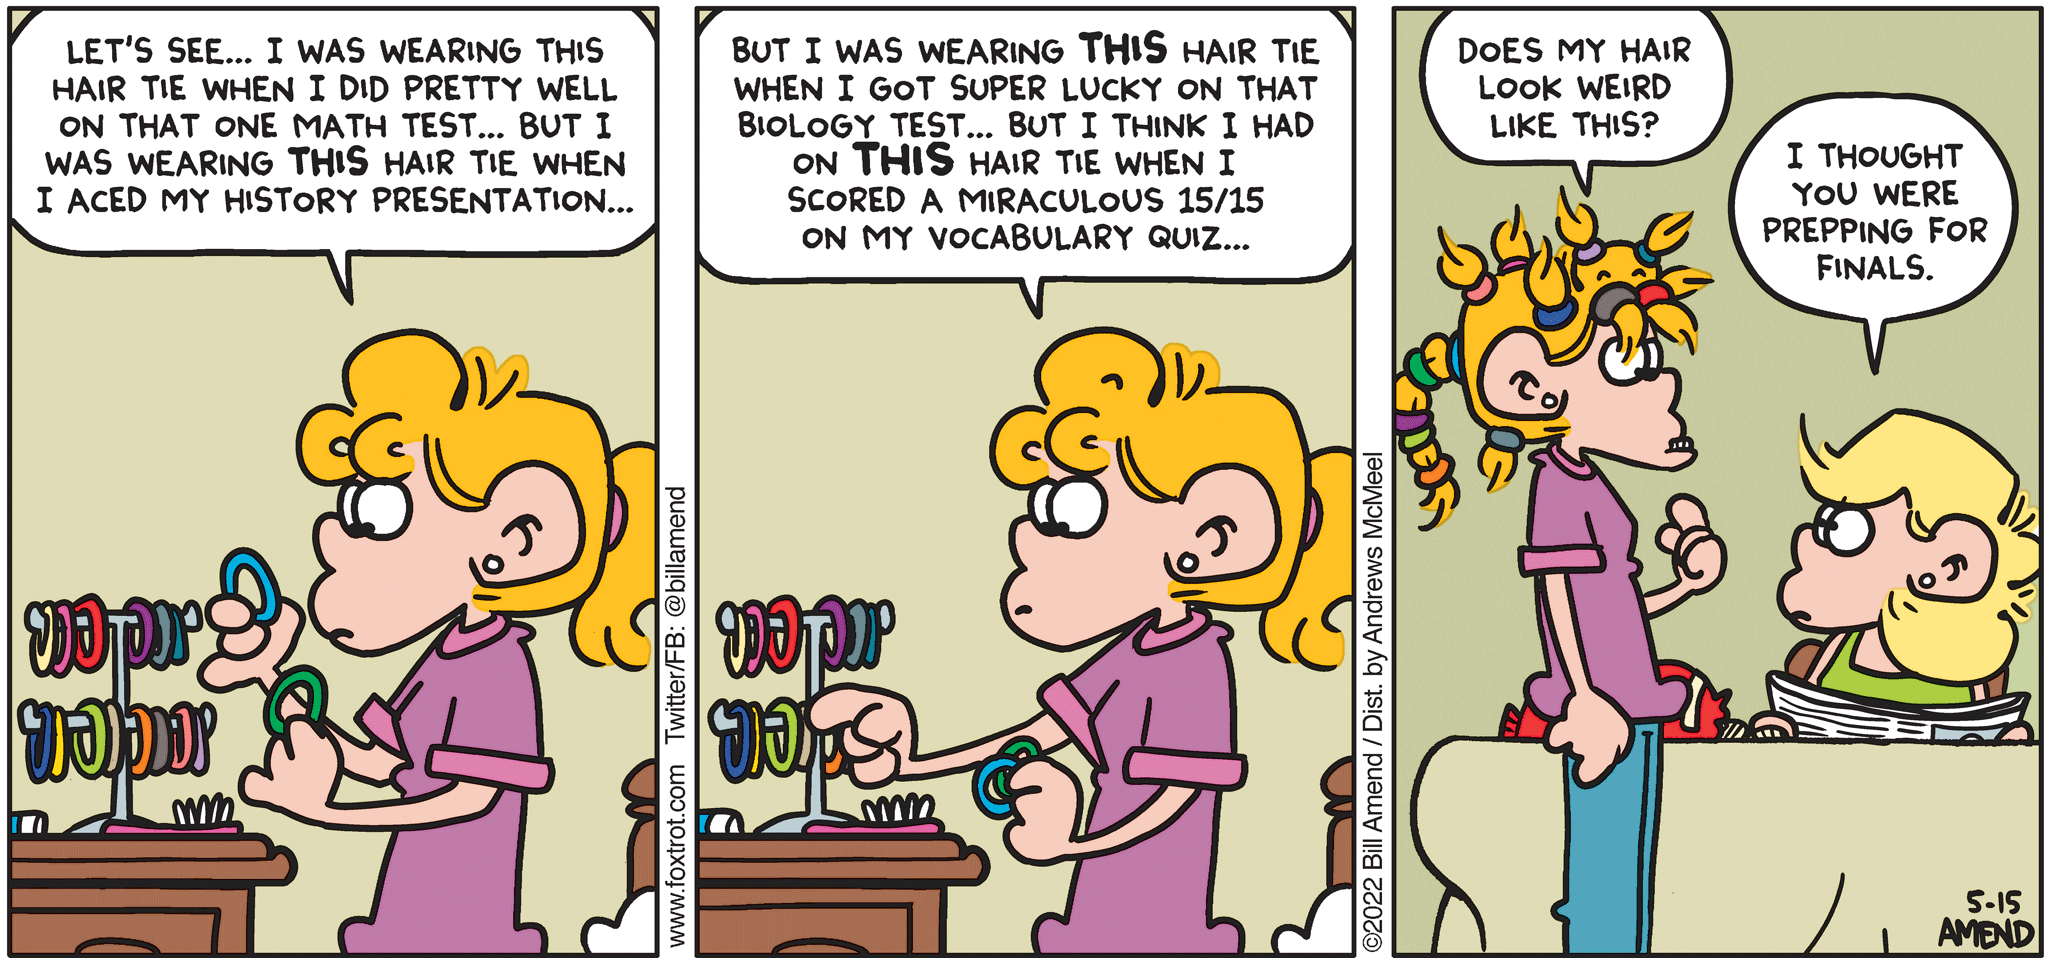 FoxTrot comic strip by Bill Amend - "Tie Game" published May 15, 2022 - Transcript: Paige Fox: Let's see... I was wearing this hair tie when i did pretty well on that one math test... But I was wearing THIS hair tie when I aced my history presentation... But I was wearing THIS hair tie when I got super lucky on that biology test... But I think I had on THIS hair tie when I scored a miracu,ous 15/15 on my vocabulary quiz... Does my hair look weird like this? Andy Fox: I thought you were prepping for finals. 